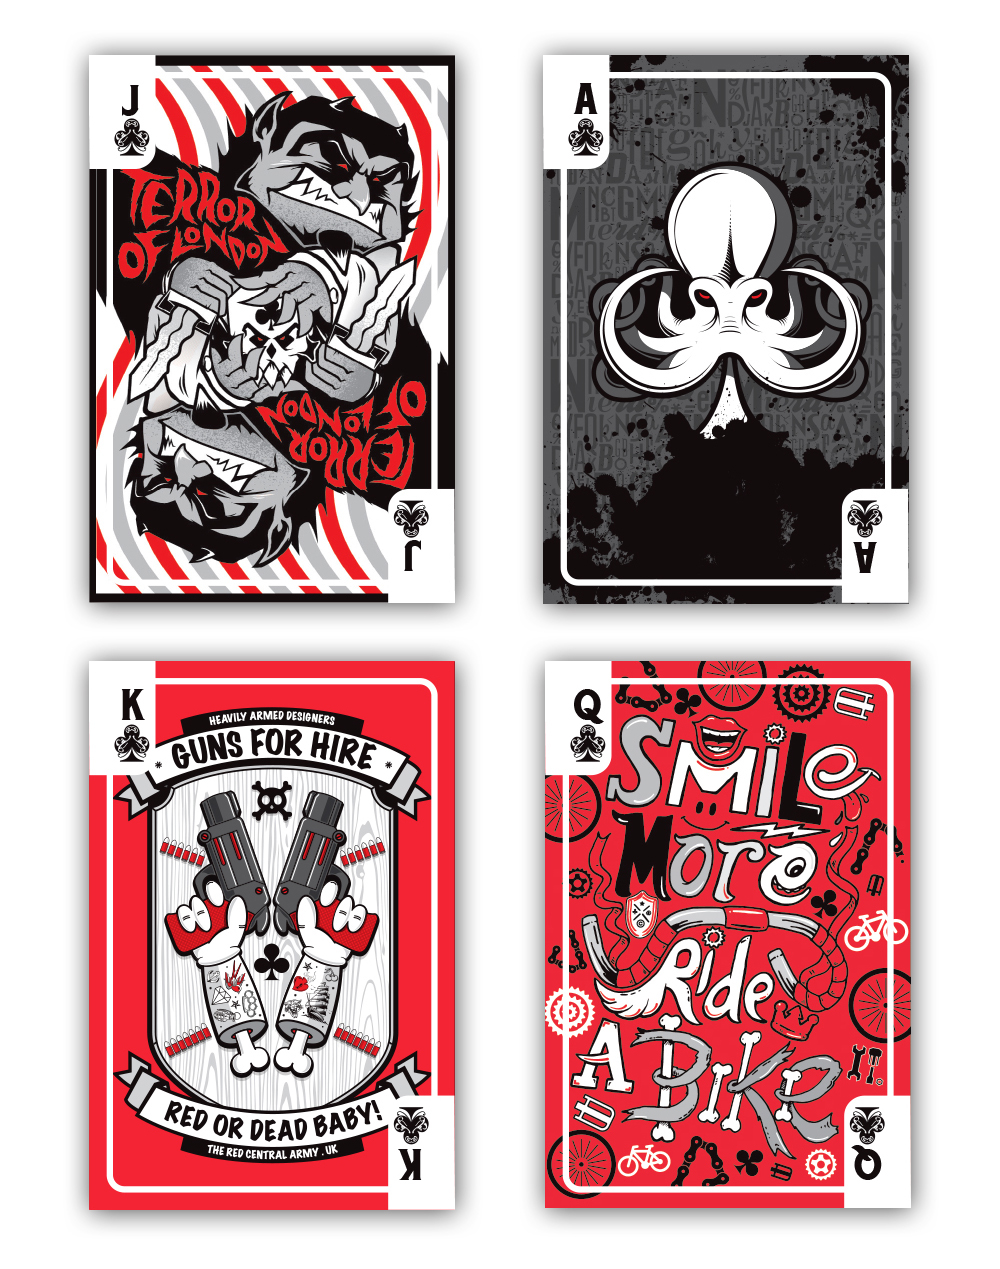 red red central cards ace king queen redcentral bath jack hearts clubs spades diamonds Poker licensing